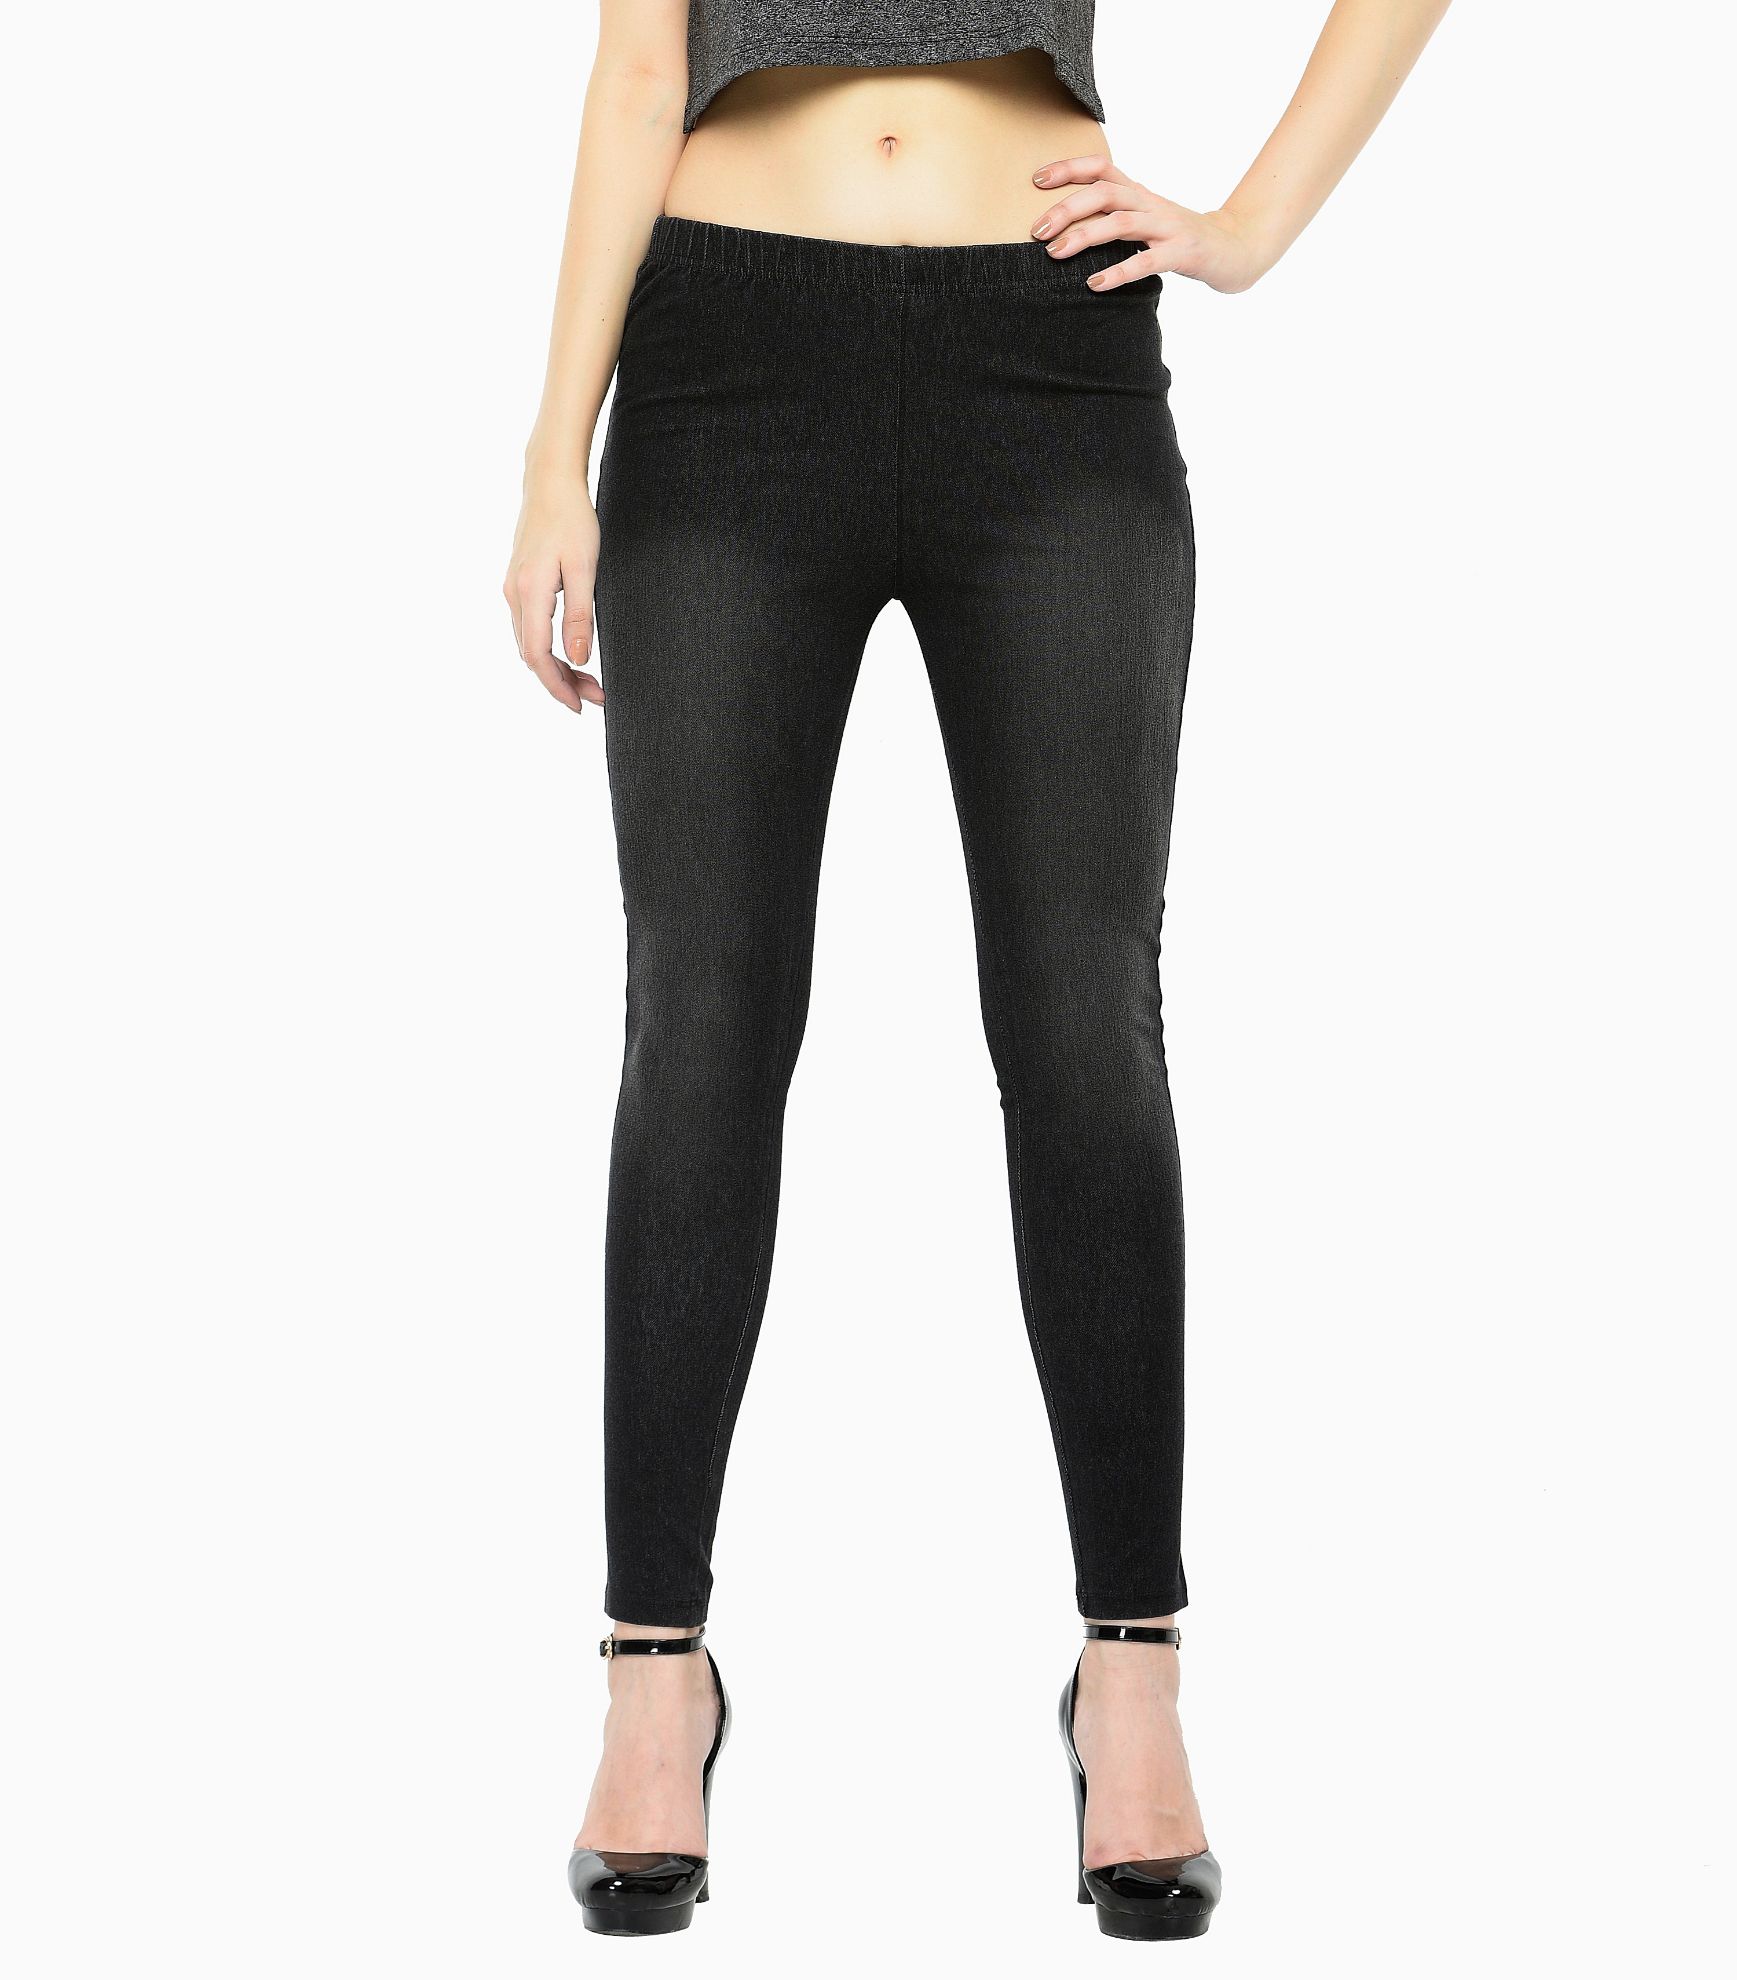 What Are Treggings And How to Wear Them - Lifestyle Fifty